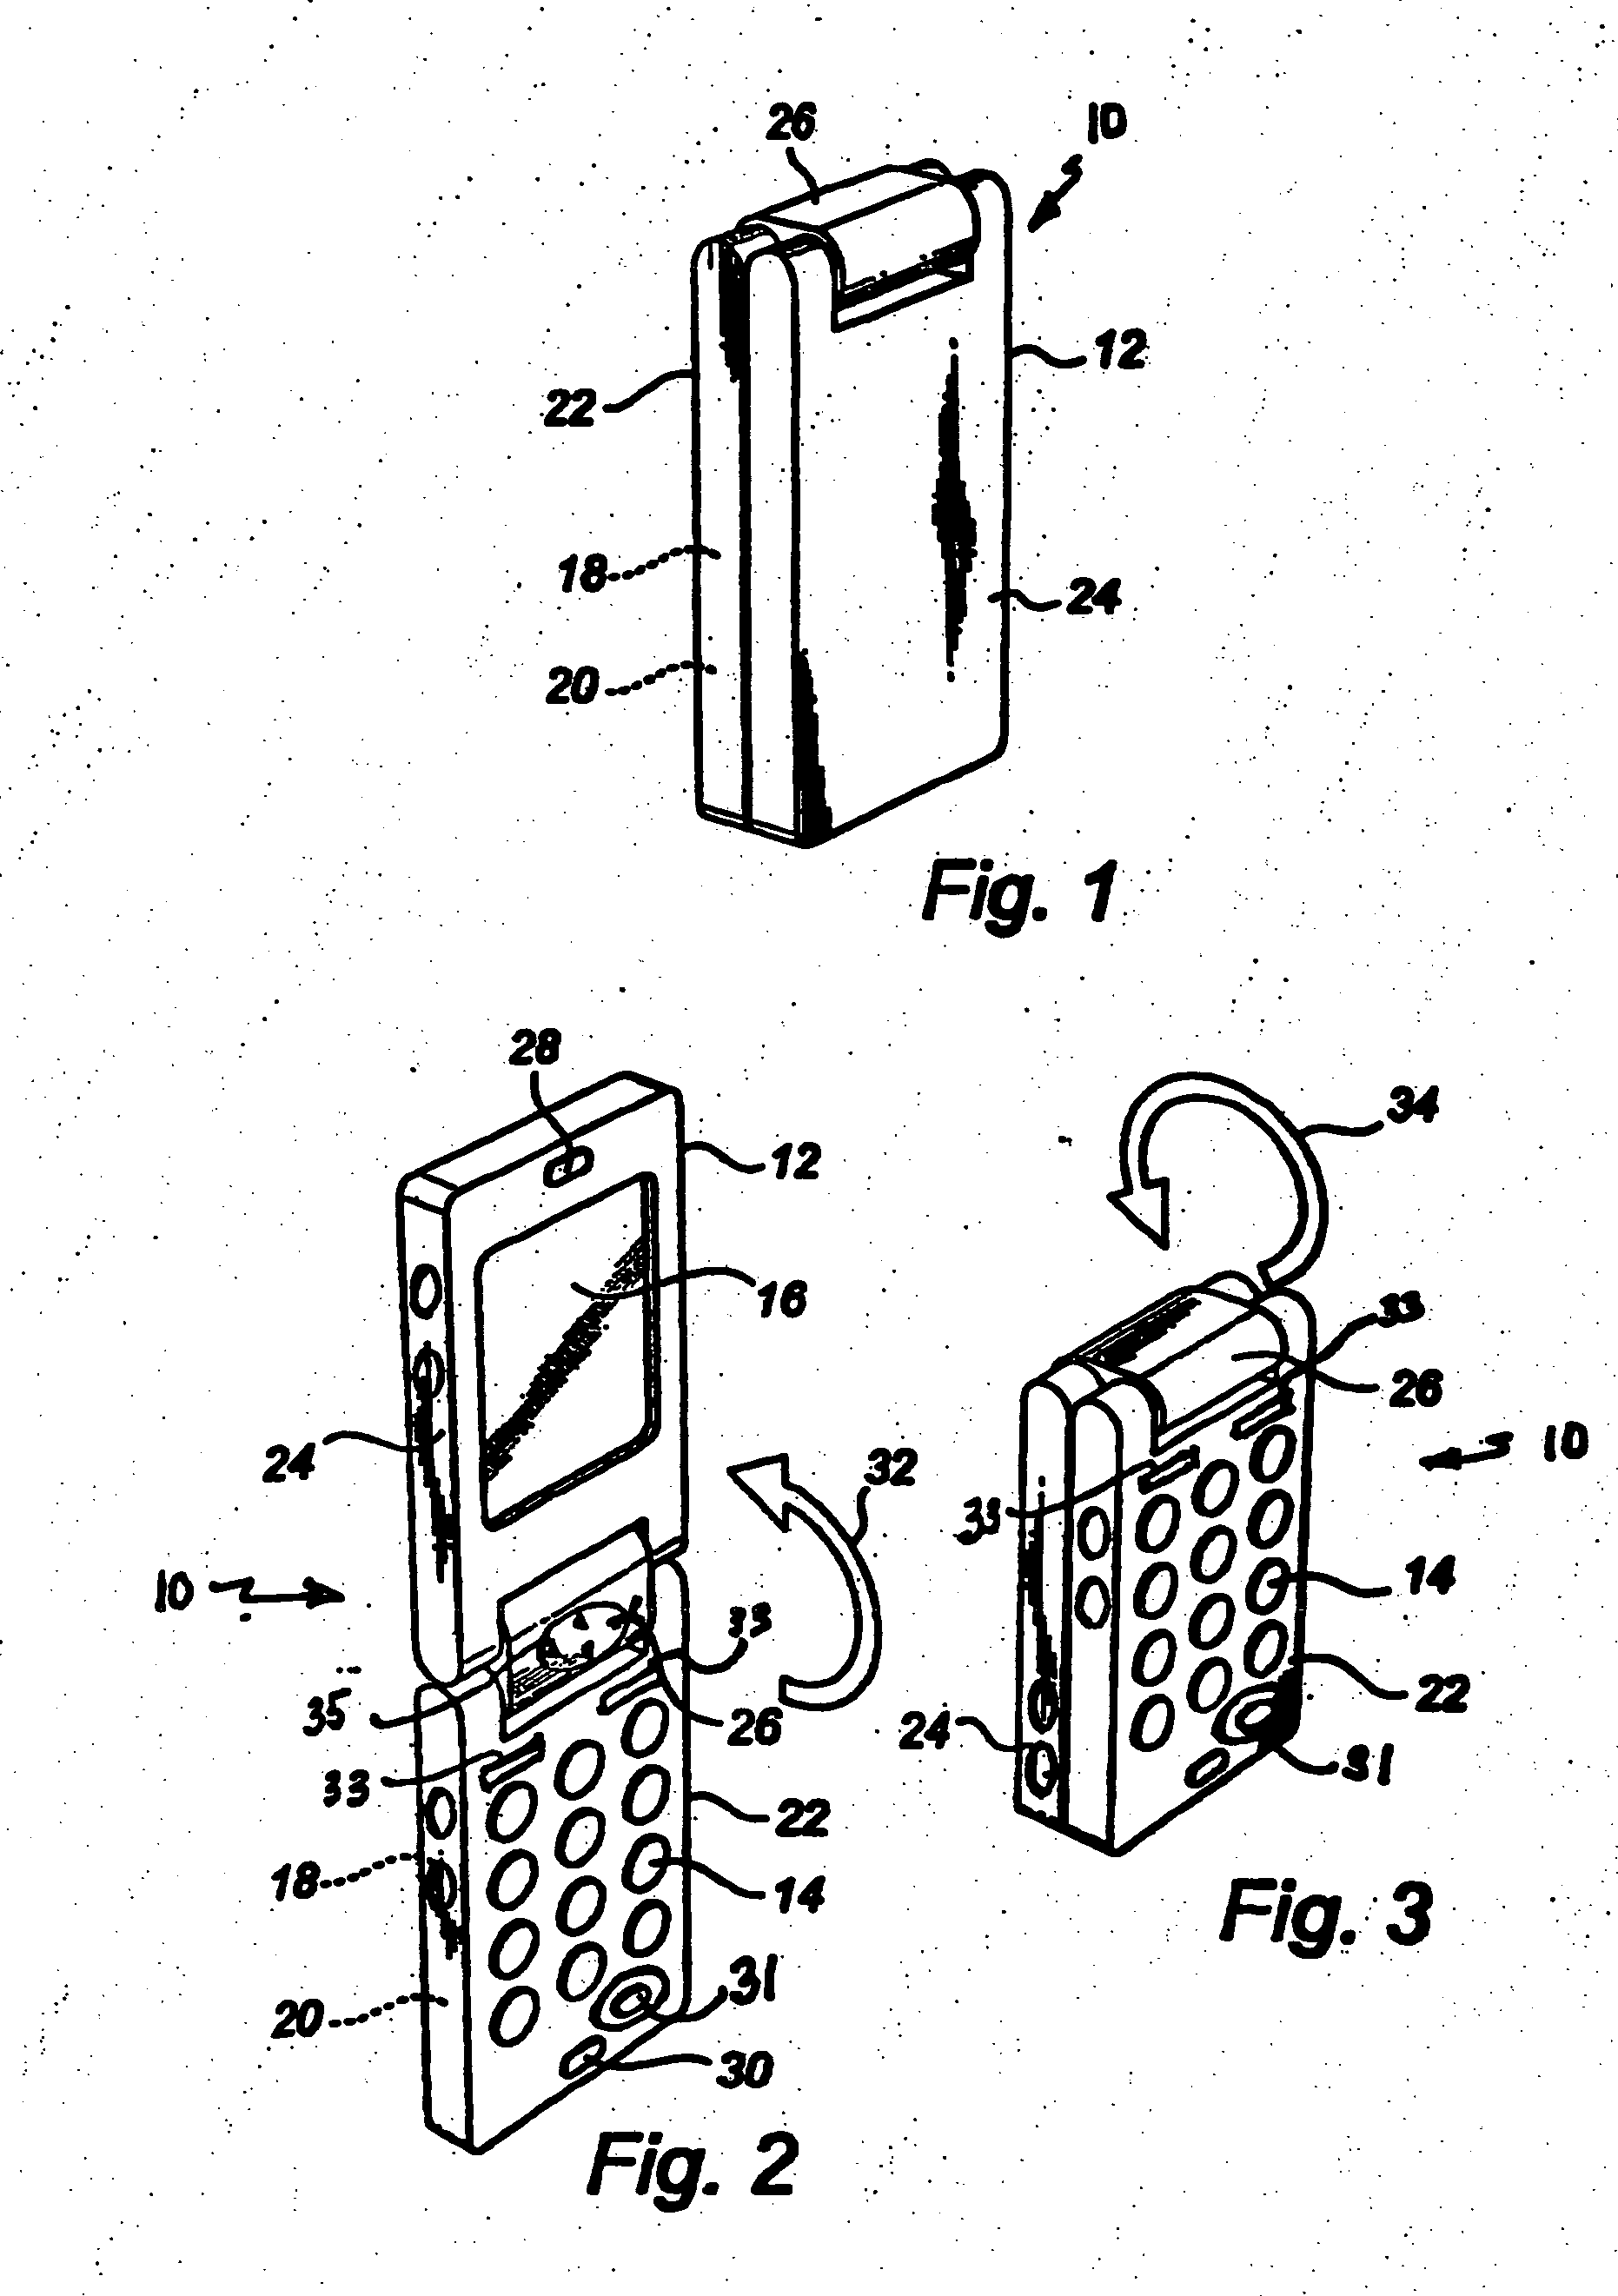 Multi-function two panel electronic device with 360° relative motion